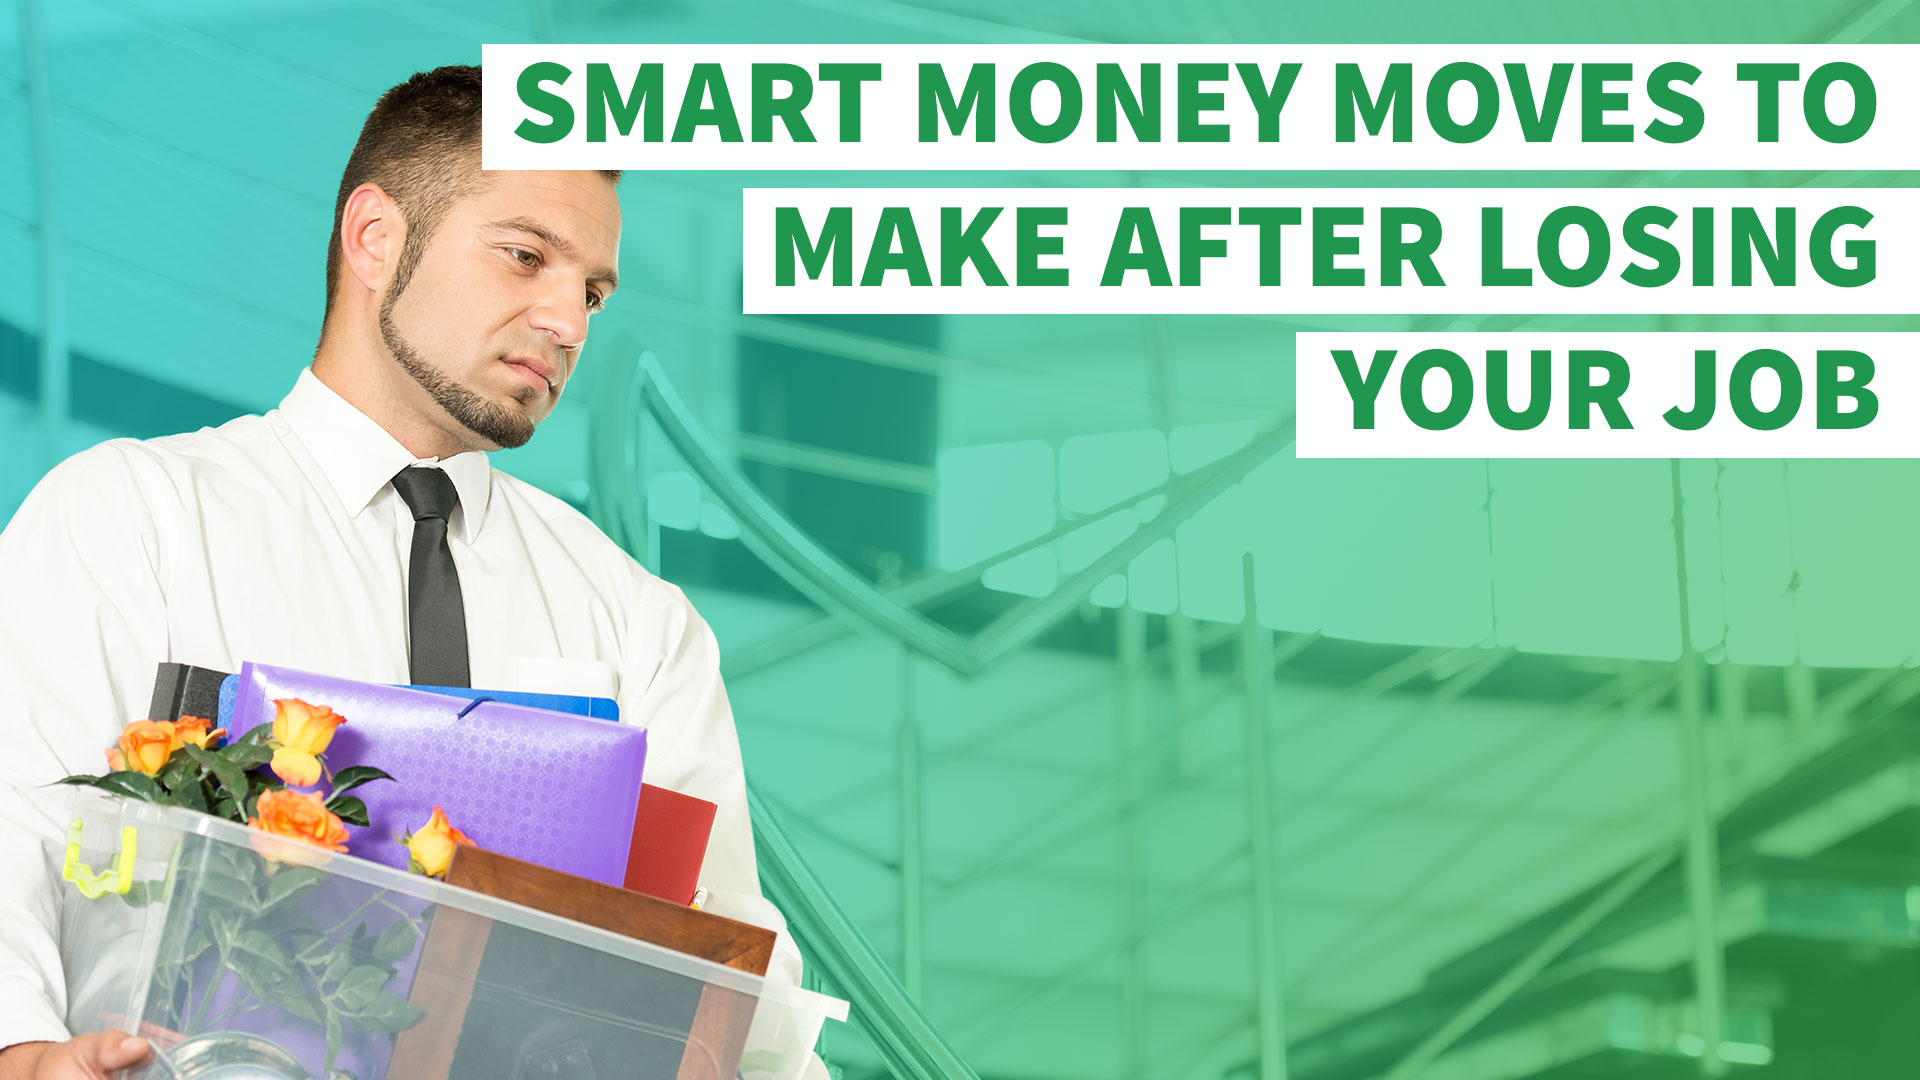 Smart Money Moves for African Americans by Kelvin E. Boston